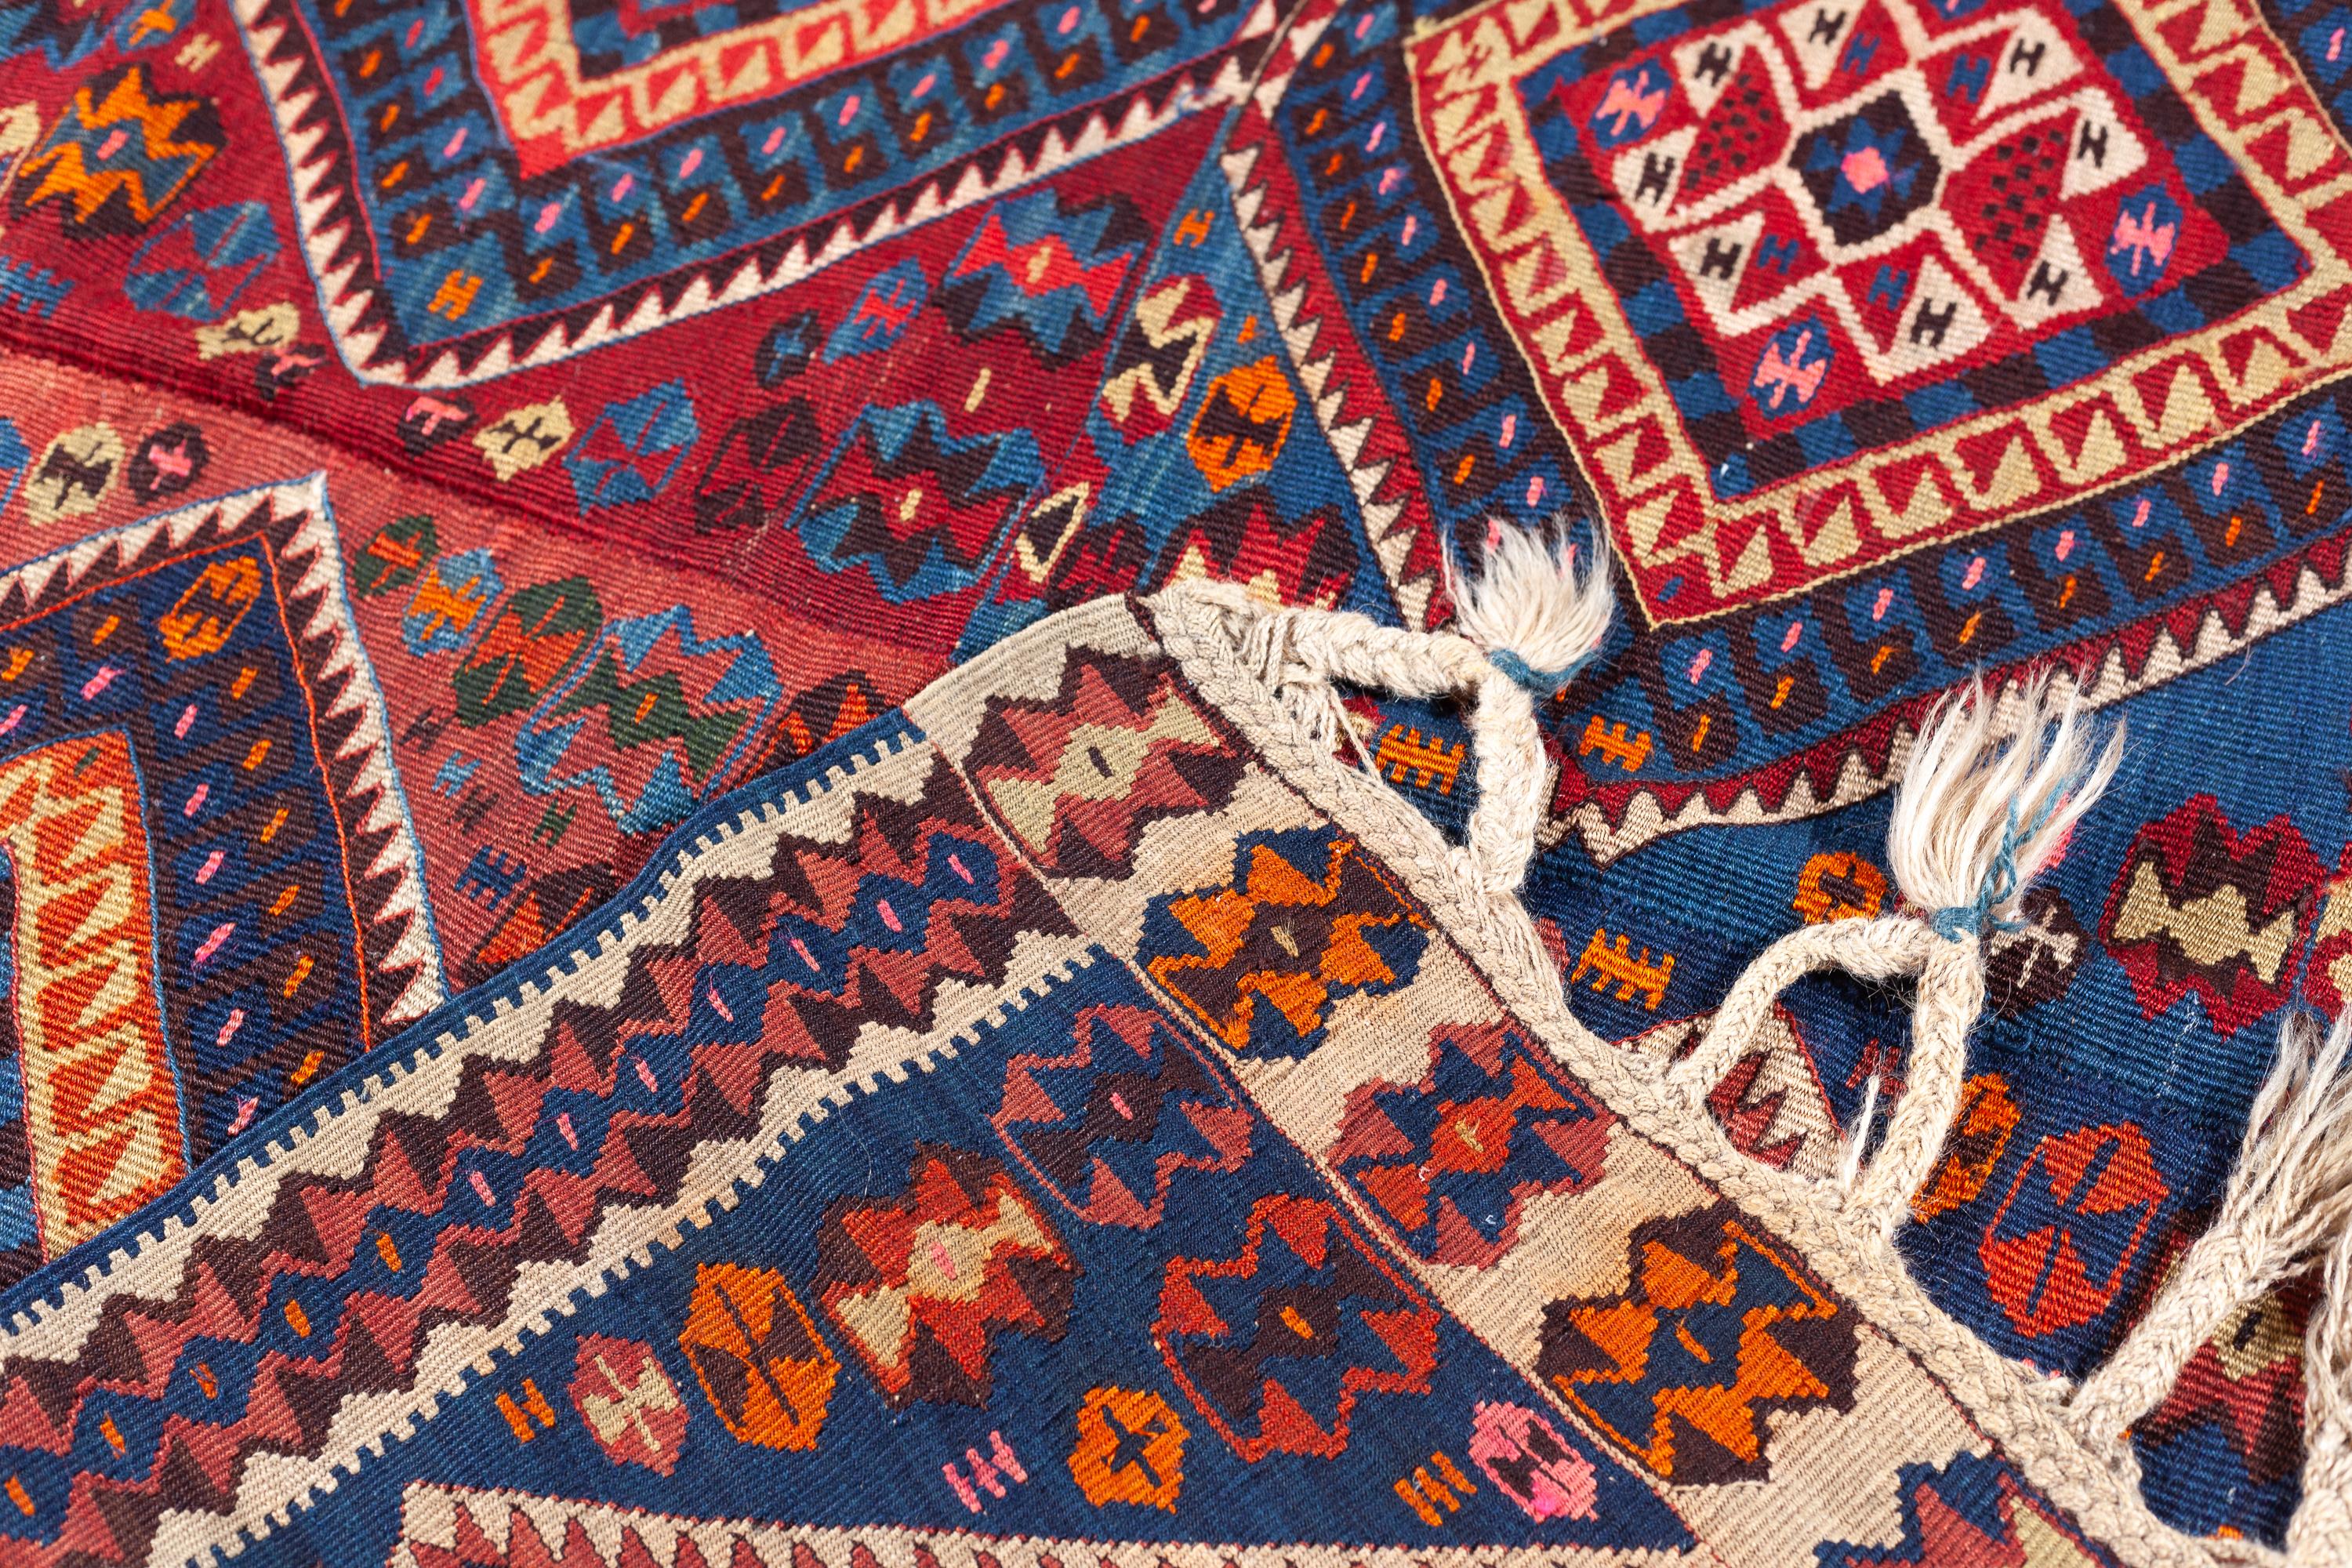 This is an Eastern Anatolian Old made in two halves Kilim from the Van region with a rare and beautiful color composition.

Van lies on the southeast side of Lake Van, which is the largest water mass in Anatolia, and the second largest in the